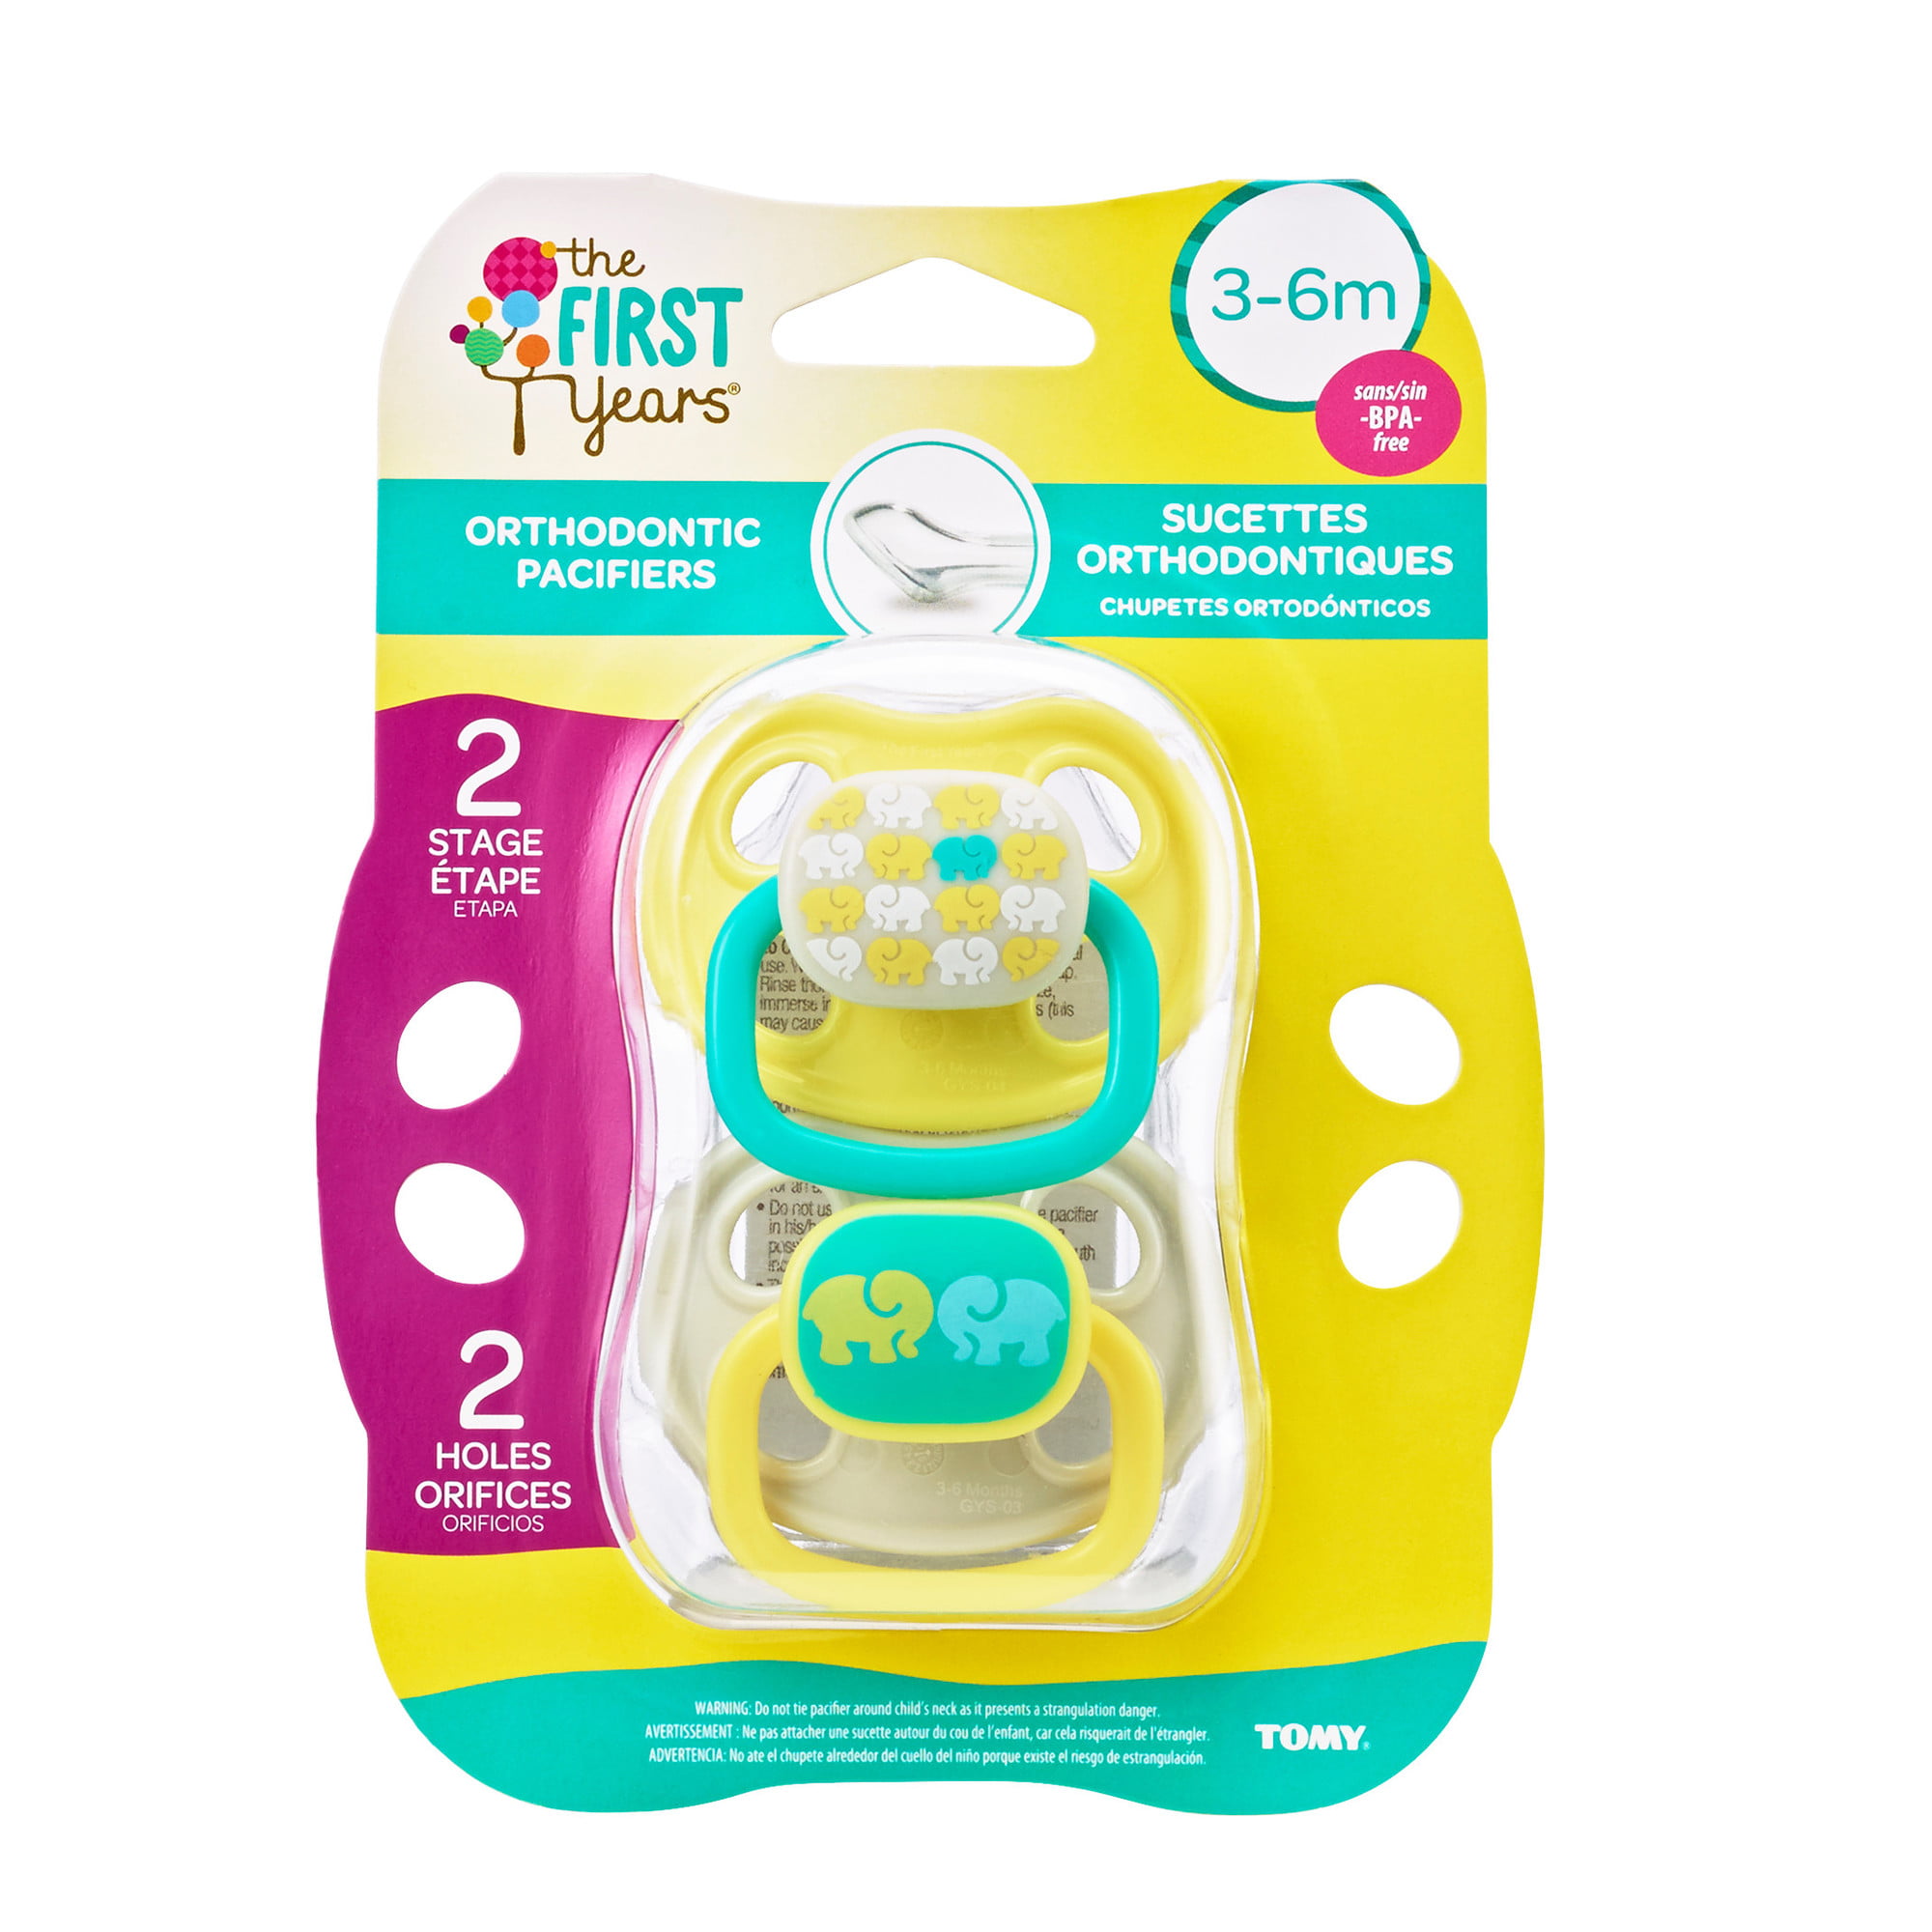 2 The First Years Orthodontic Pacifiers 6-18 Months BPA Free Stage 3 NEW Seal 